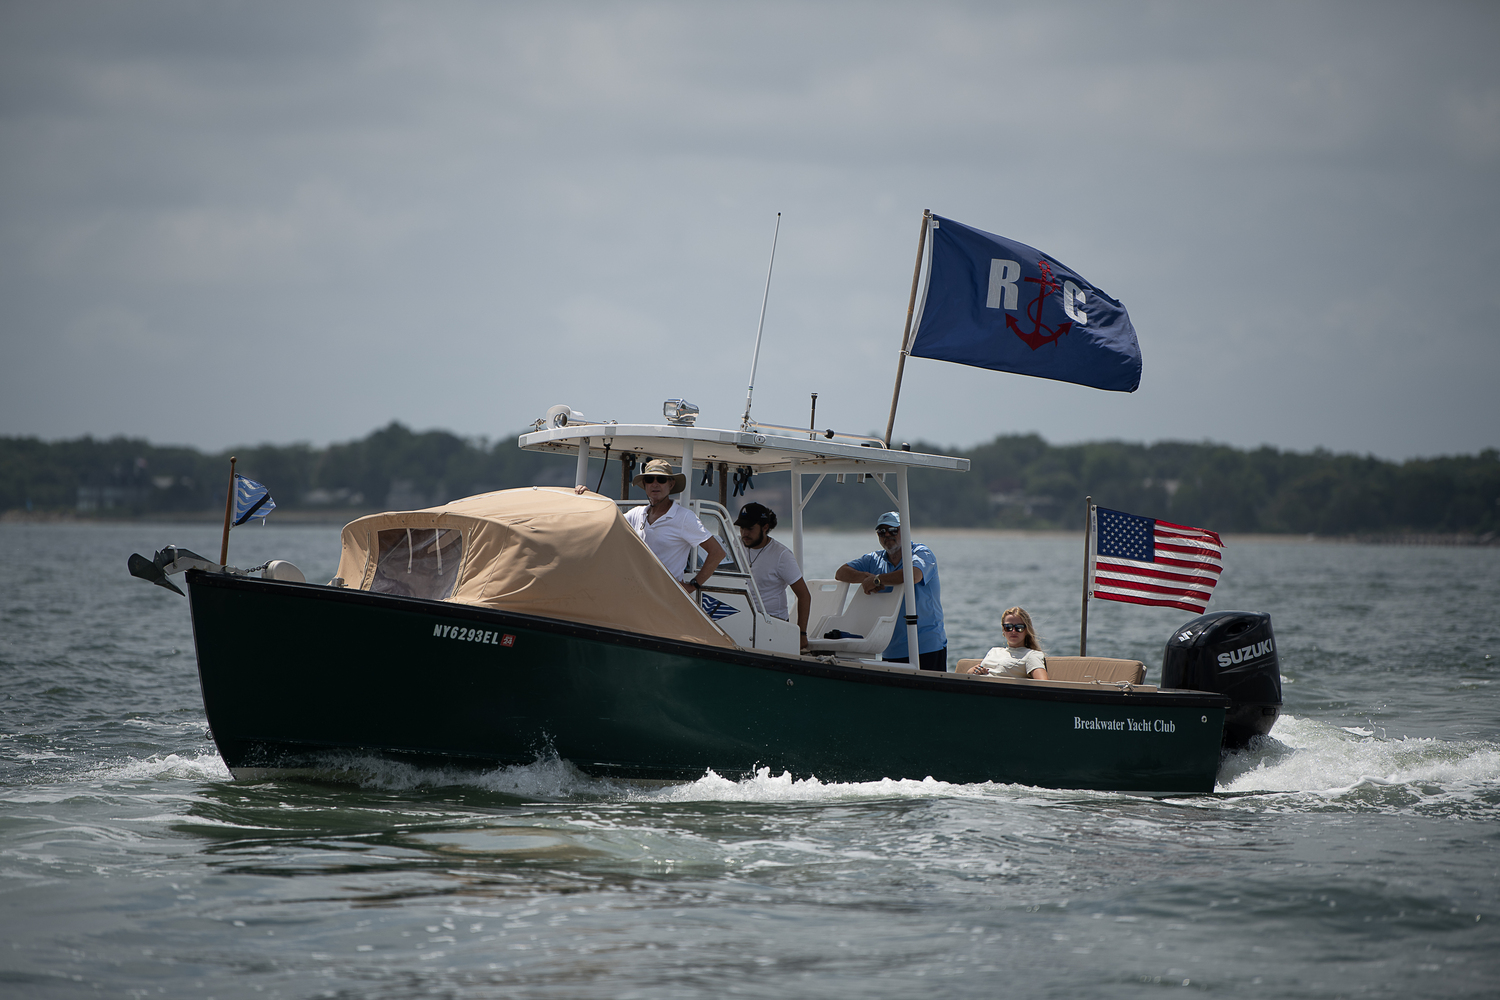 The committee boat from Breakwater Yacht Club.  GARY SENFT/EASTENDMARINEPHOTOGRAPHY.COM